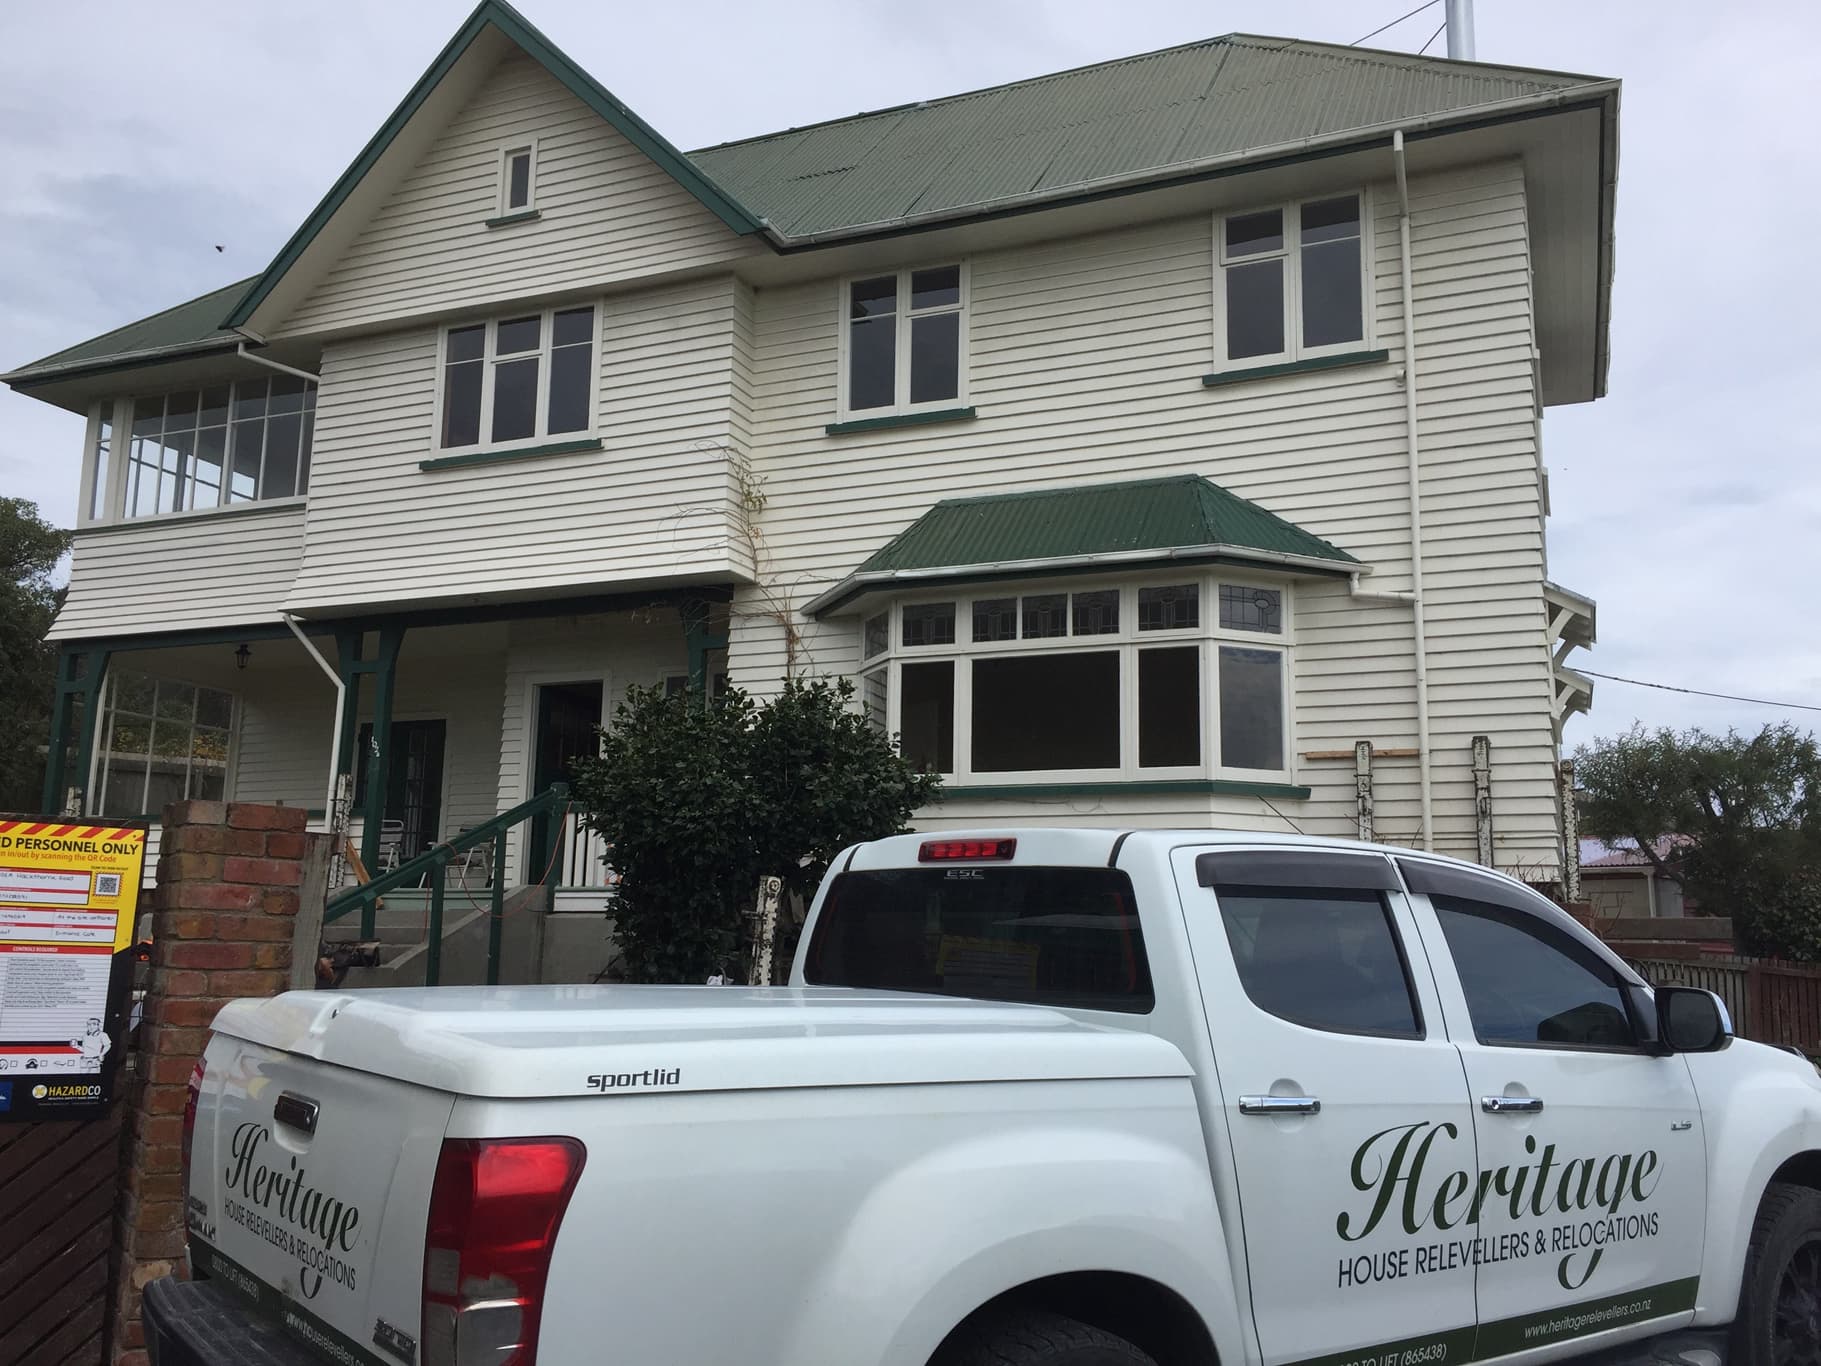 Heritage House Relevellers' foundation replacement service in Christchurch